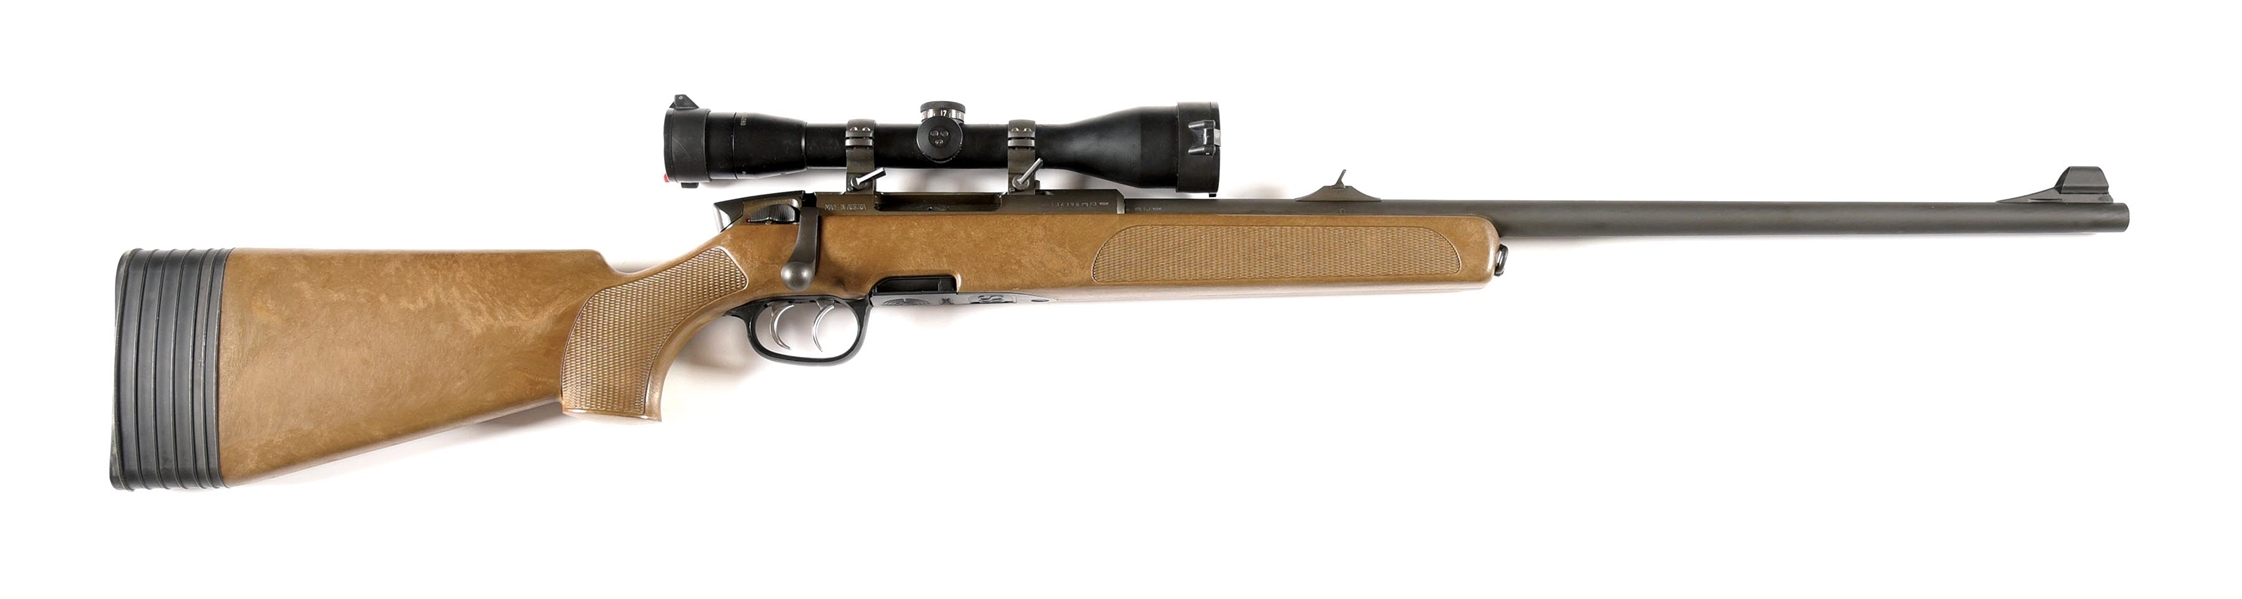 (M) STEYR SSG.69 .308 BOLT ACTION RIFLE WITH KAHLES ZF69 SCOPE.